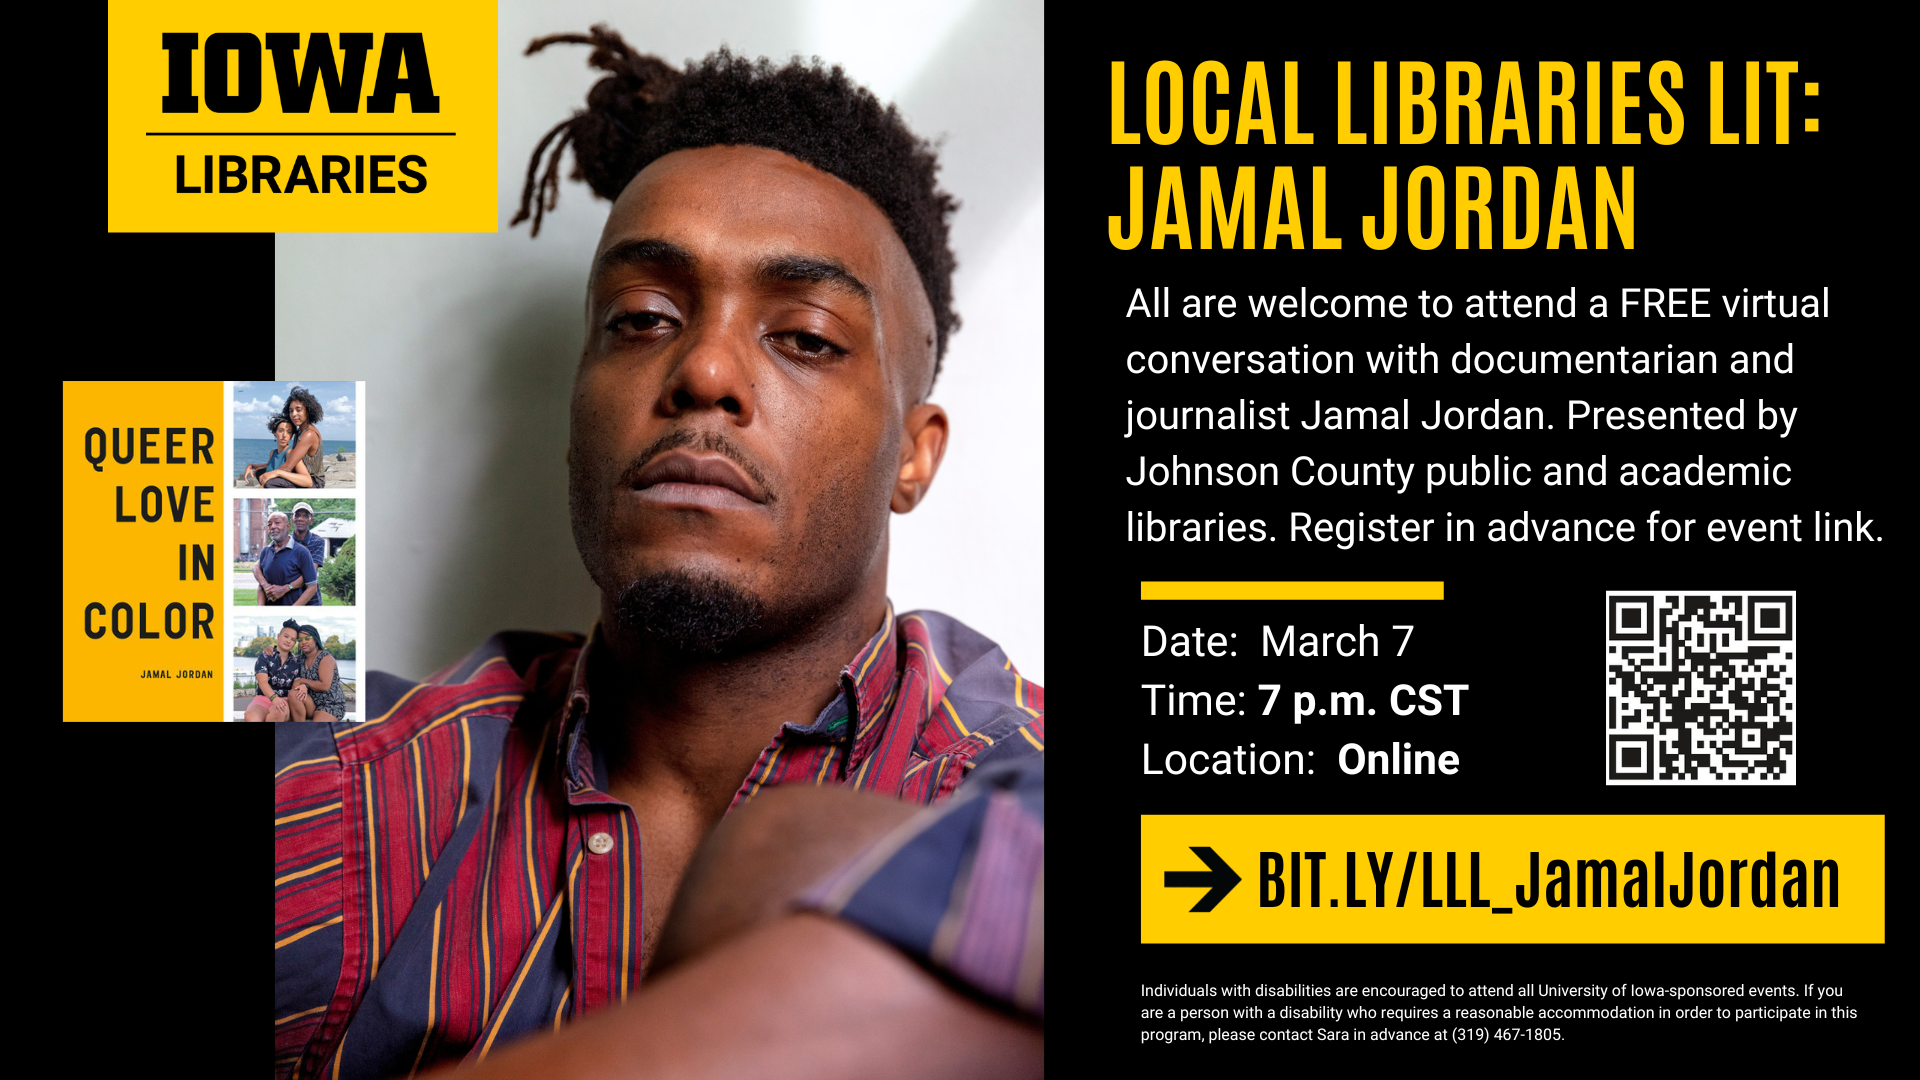 Local Libraries LIT: Jamal Jordan. March 7 at 7 PM online. Register in advance on the Iowa City Public Library website.